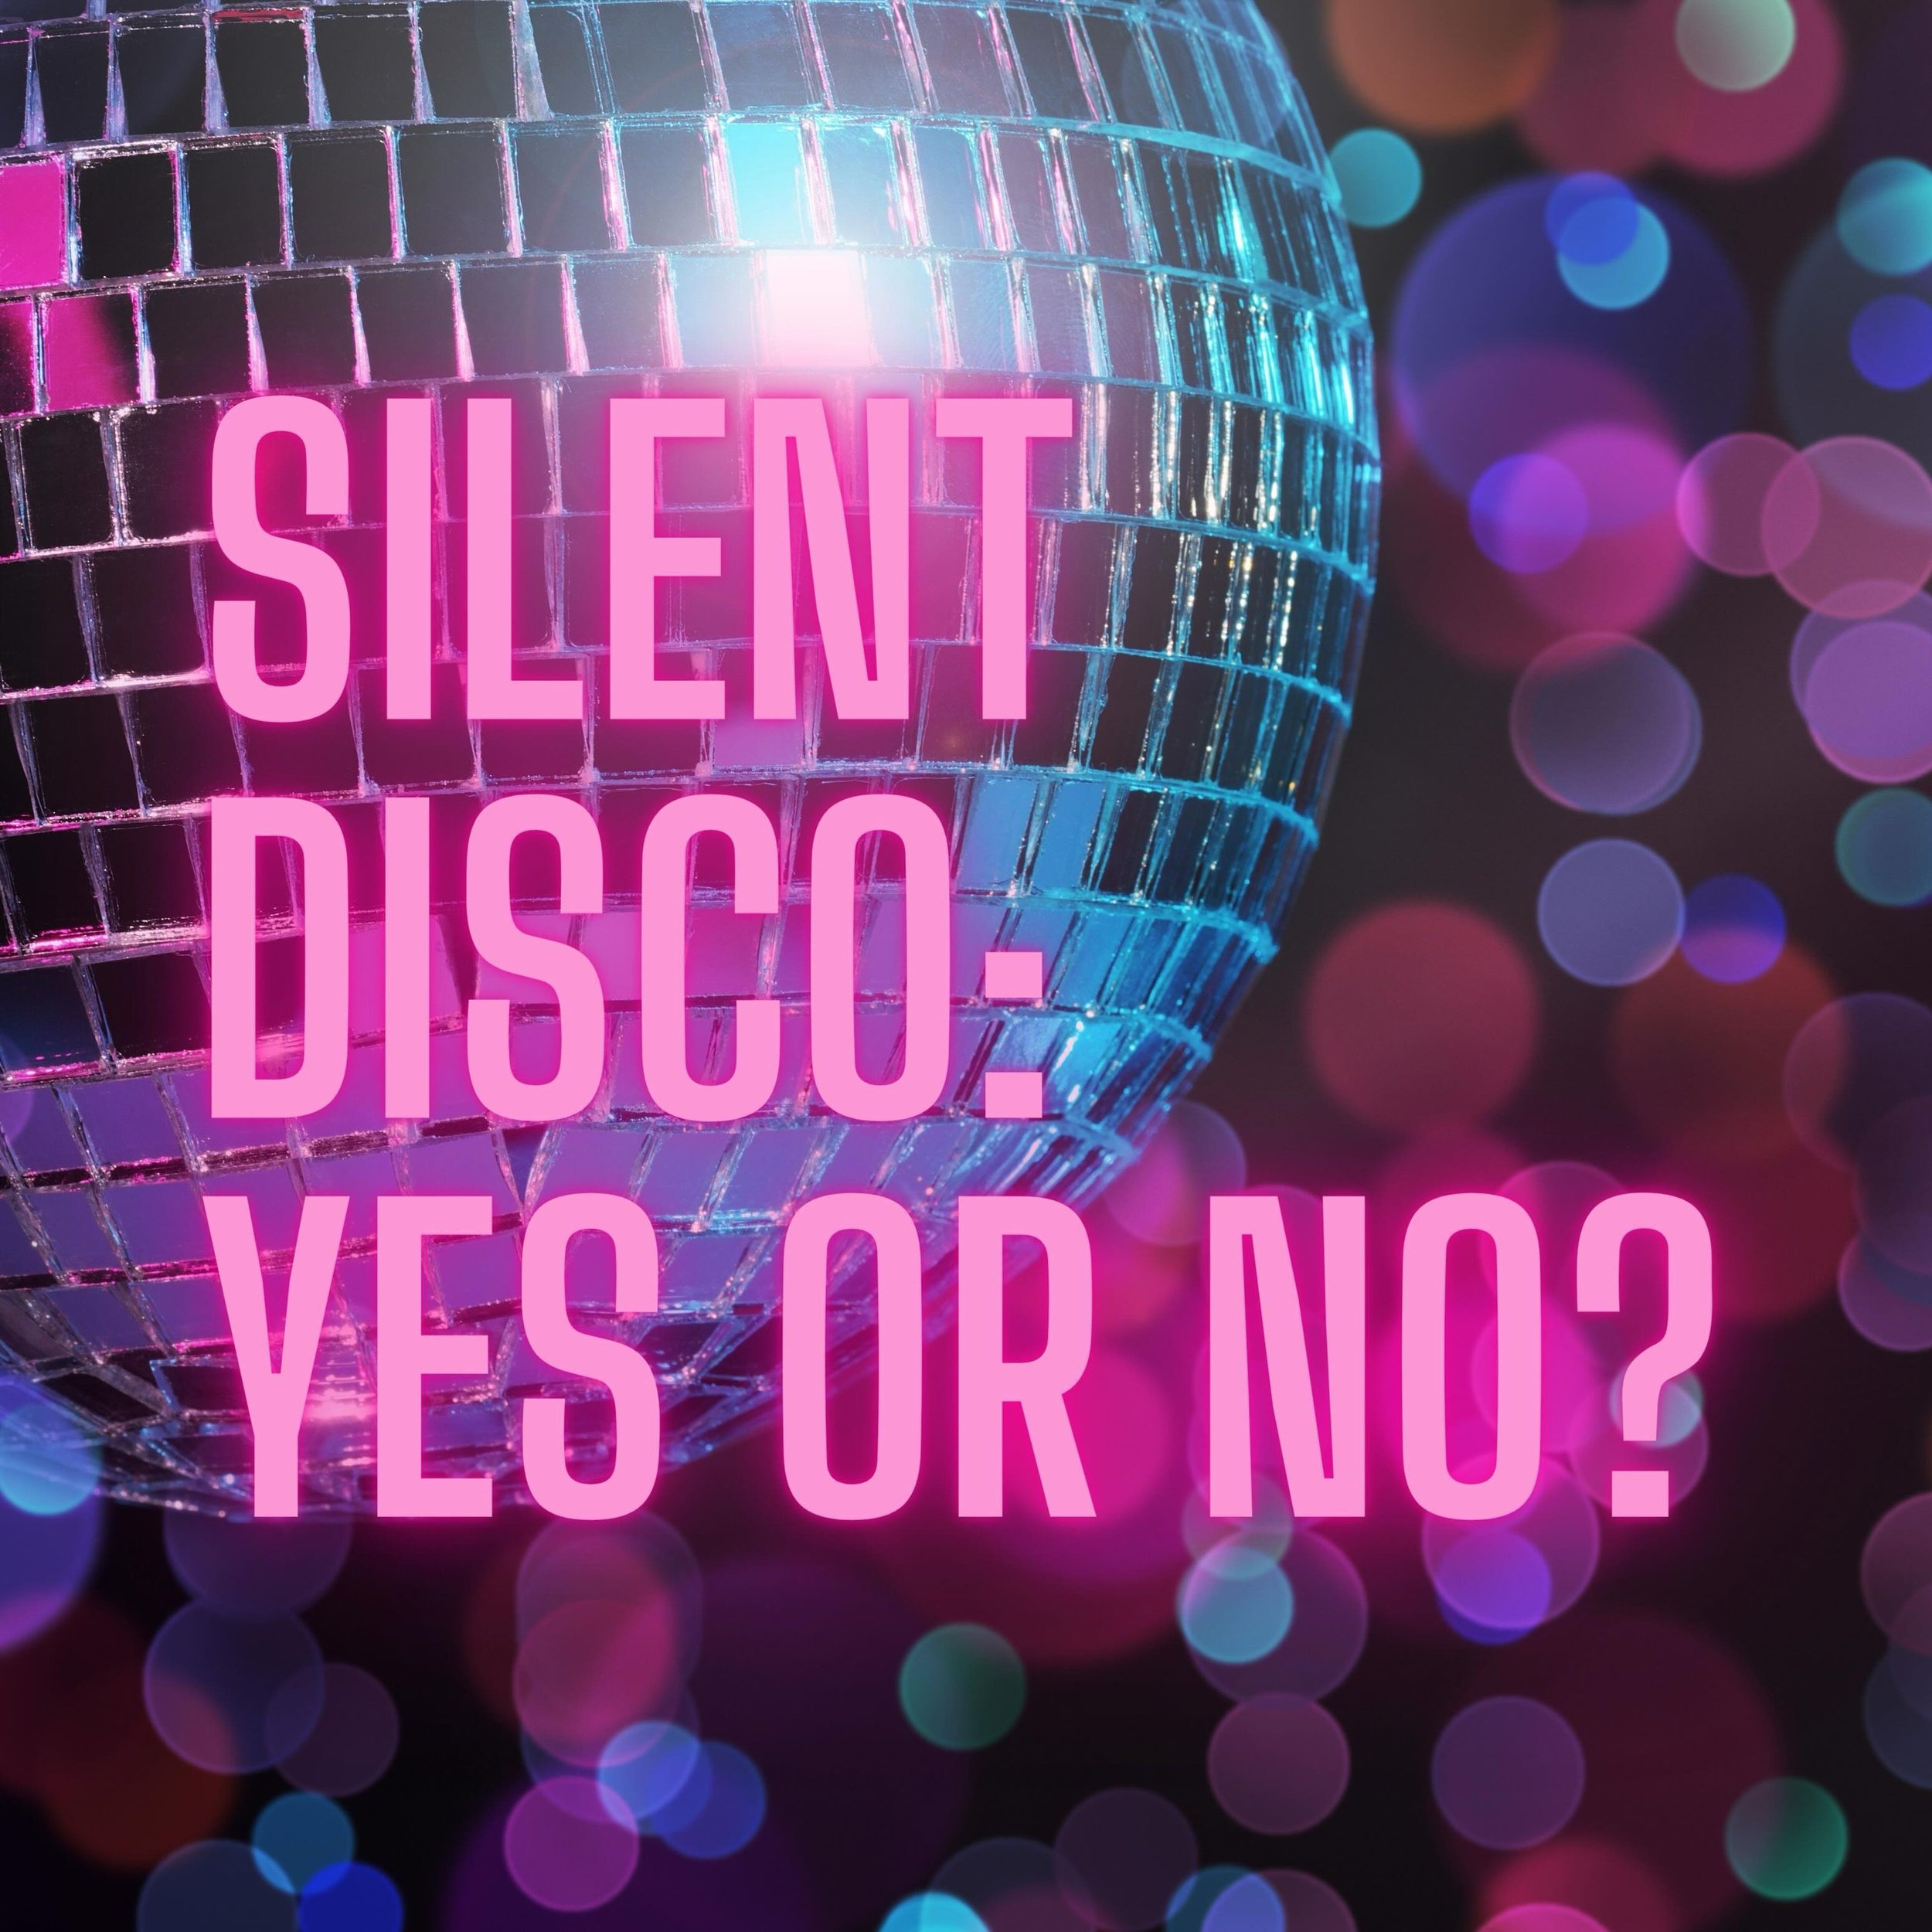 &ldquo;A silent disco or silent rave is an event where people dance to music listened to on wireless headphones. Rather than using a speaker system, music is broadcast via a radio transmitter with the signal being picked up by wireless headphone rece